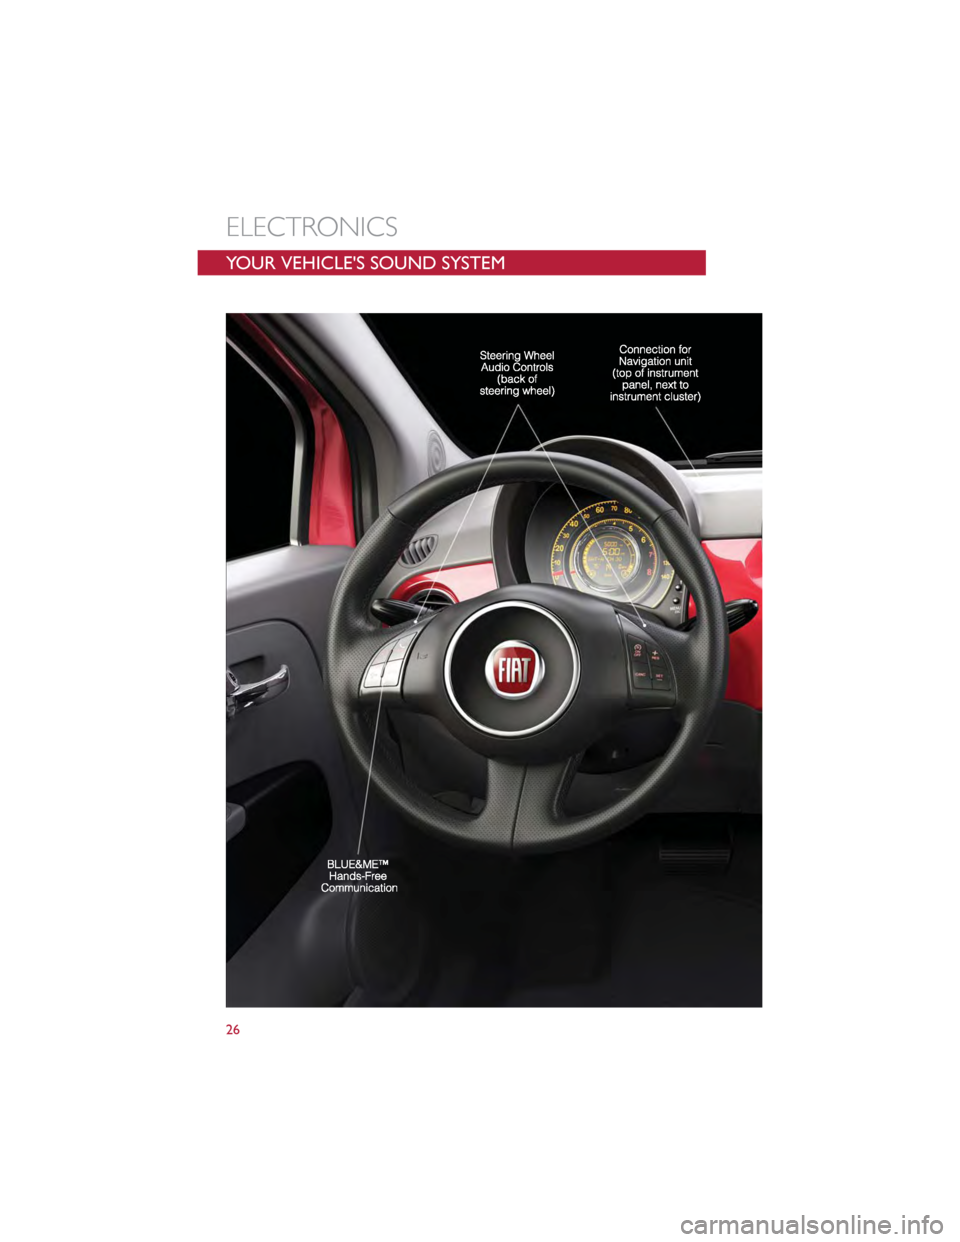 FIAT 500 GUCCI 2012 2.G Owners Manual YOUR VEHICLES SOUND SYSTEM
ELECTRONICS
26 